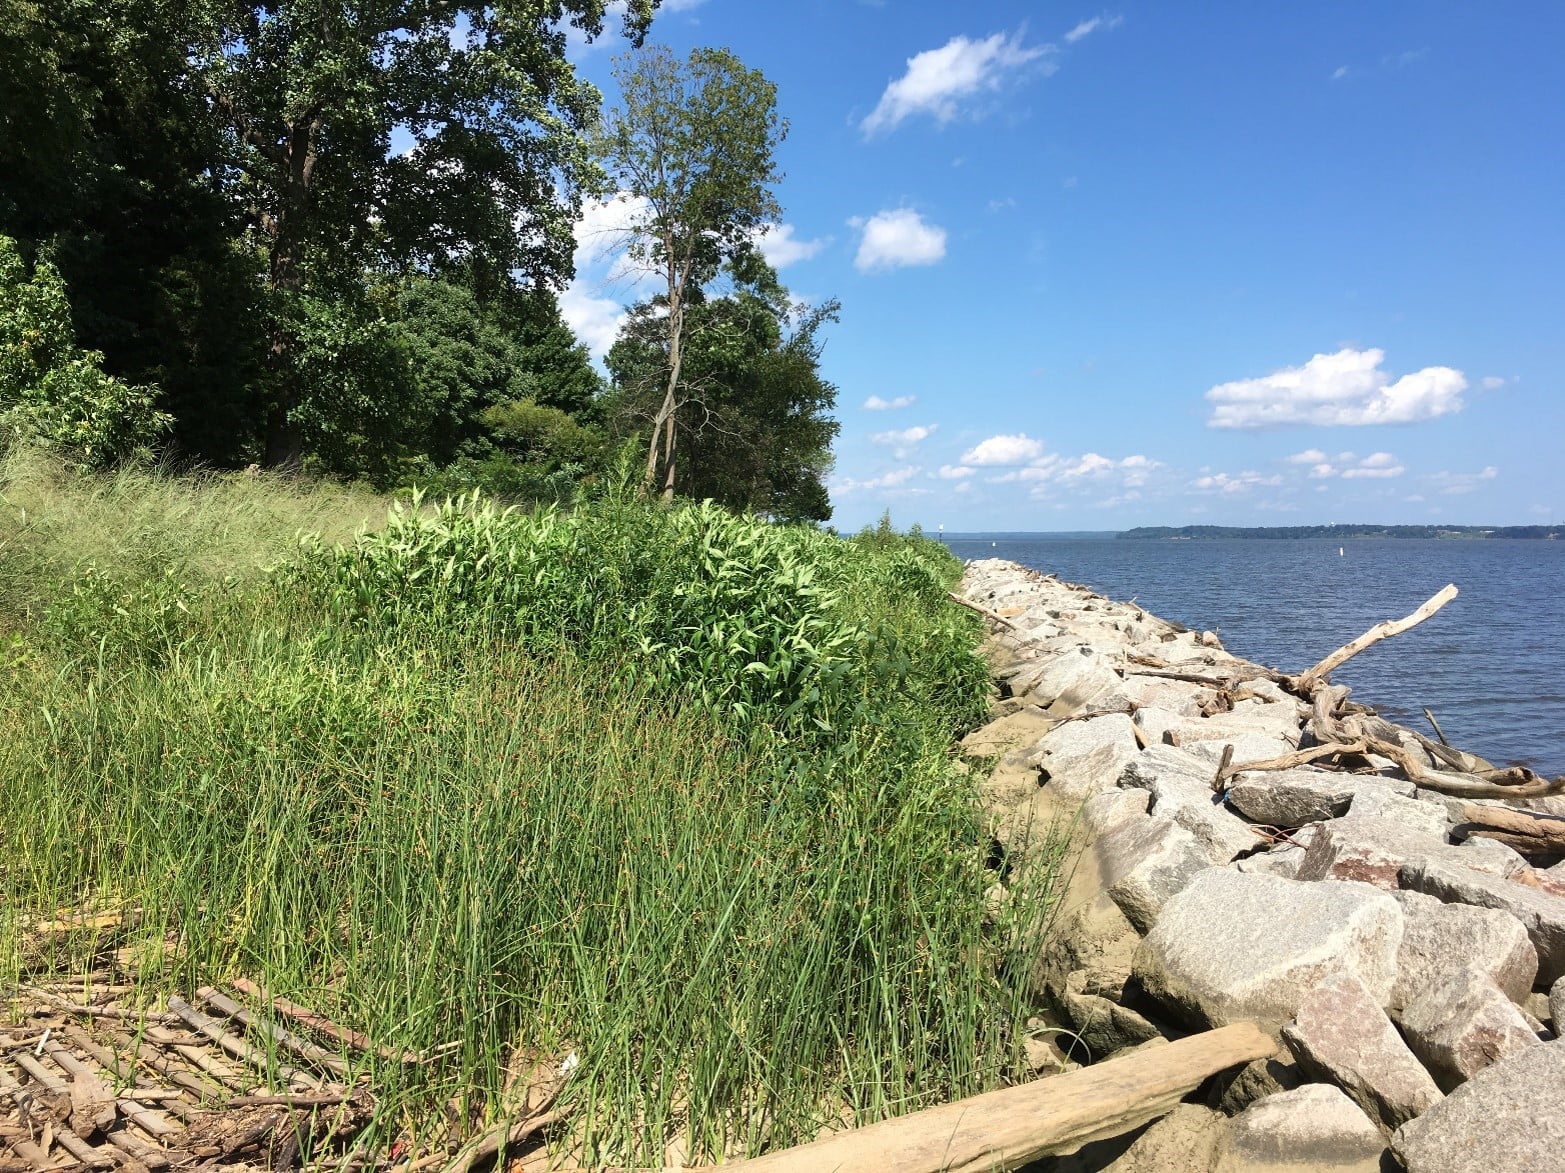 The Process to Create and Monitor a Living Shoreline Project